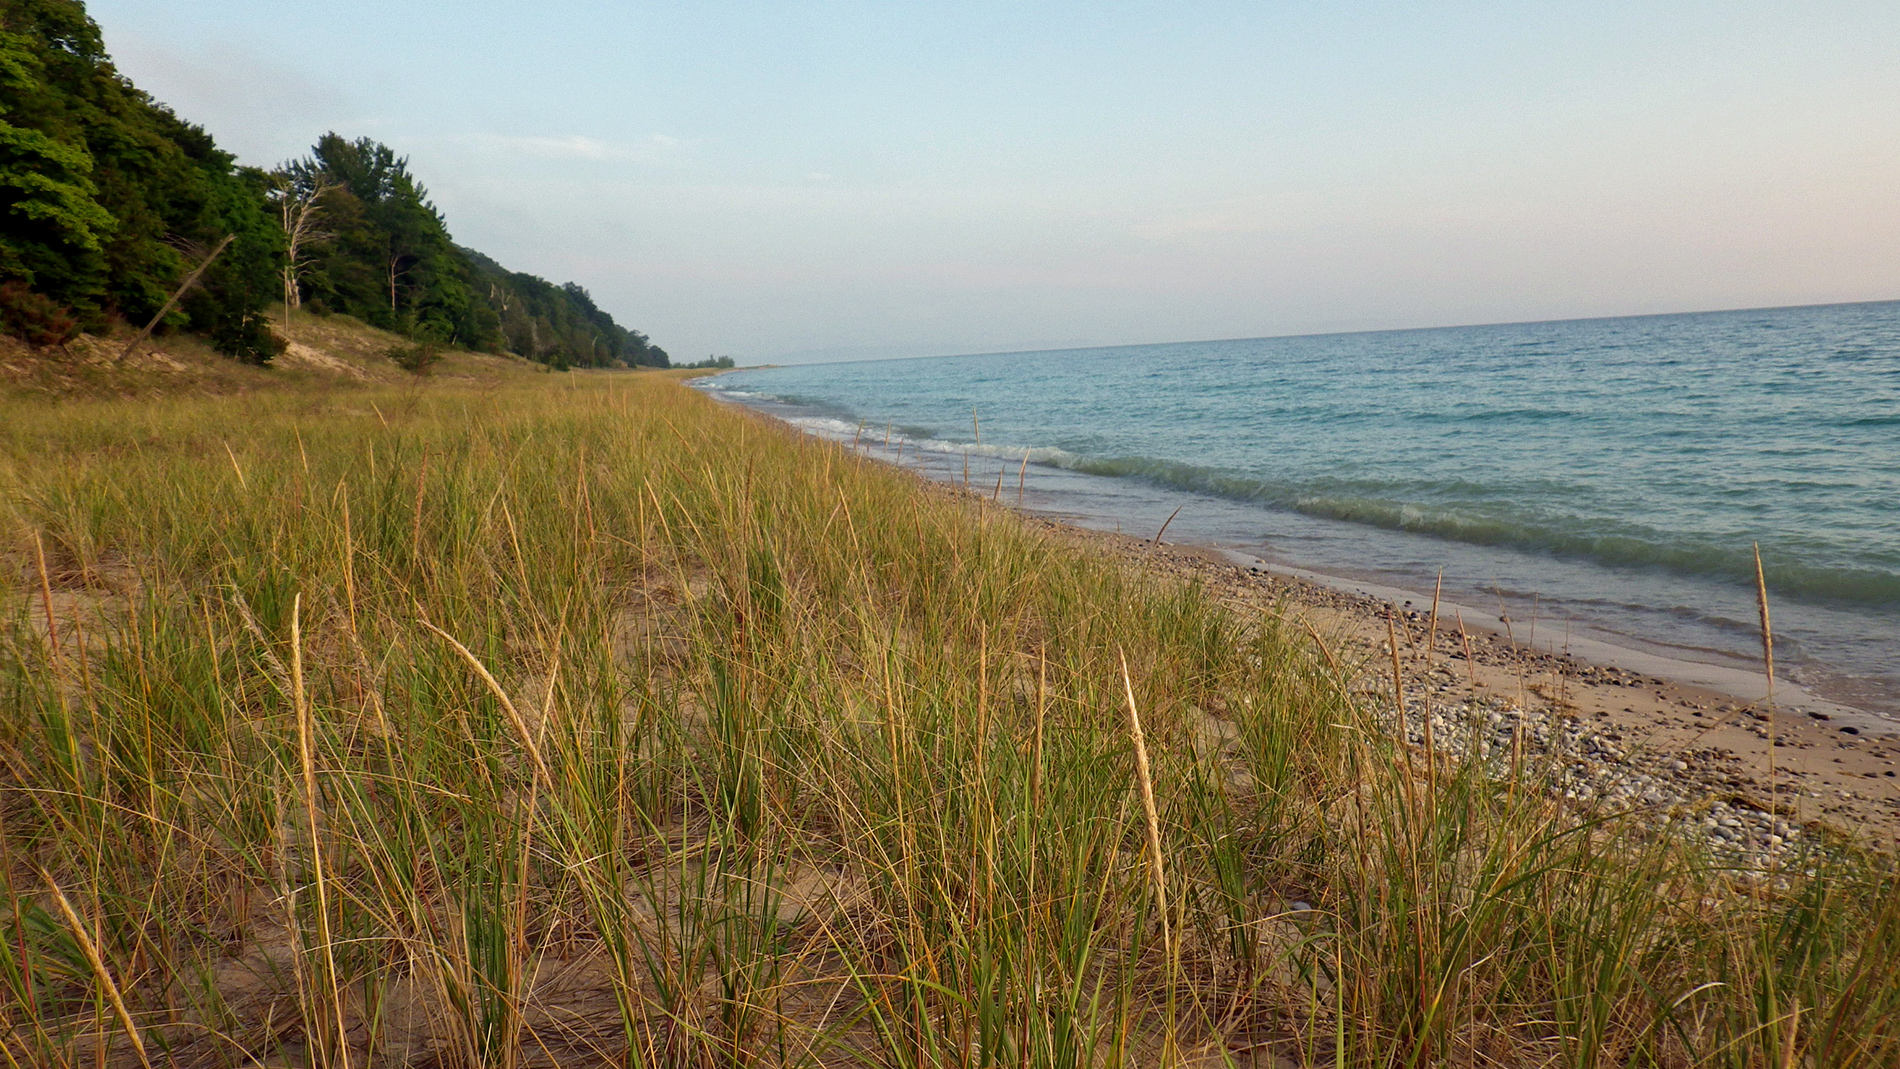 Beach grass. Looking south from Fred's.